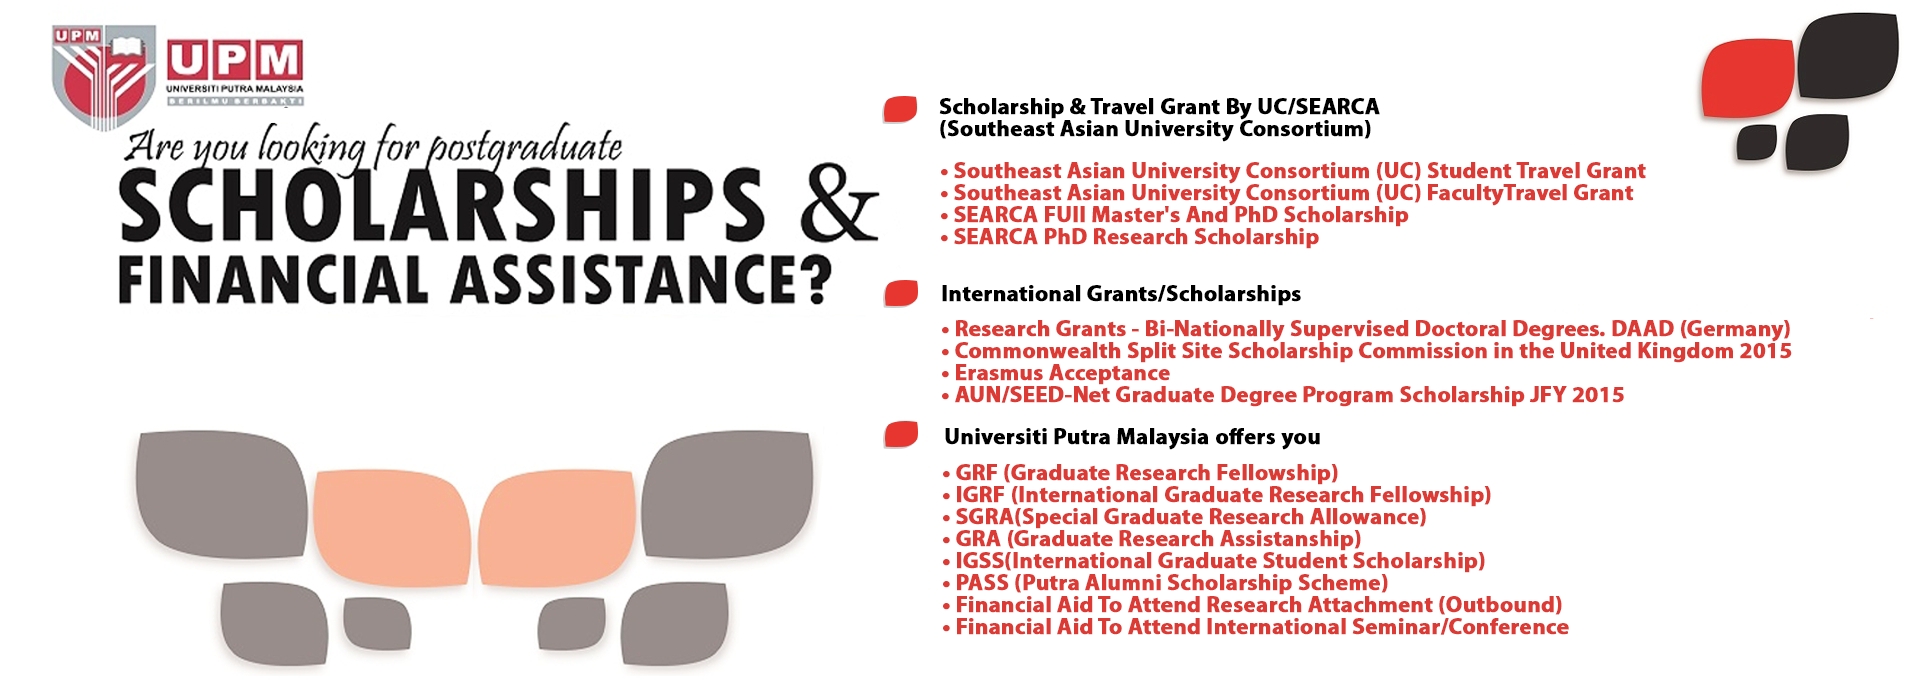 Financial Assistance & Scholarship